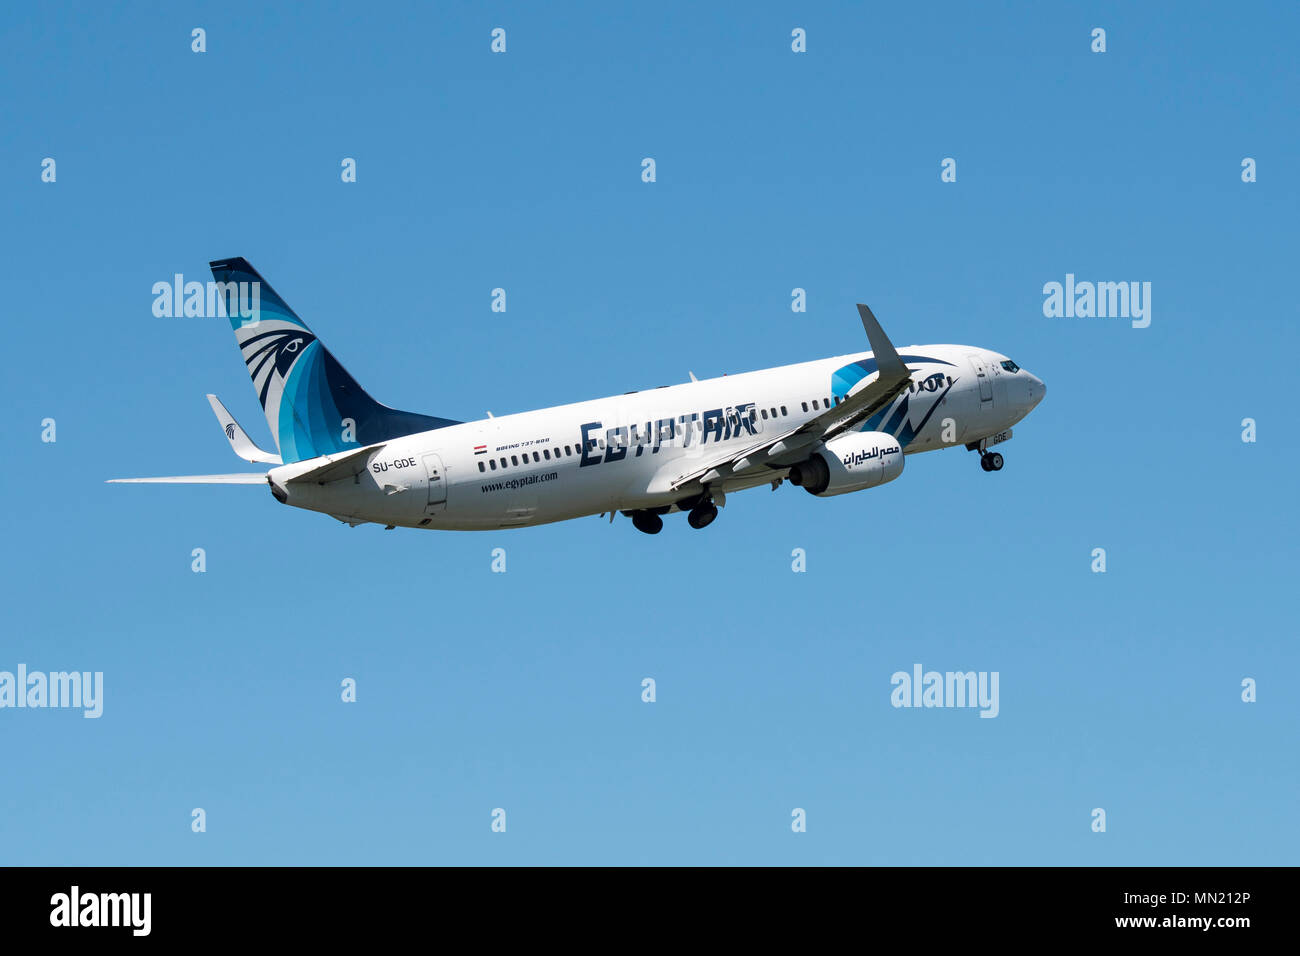 Boeing 737-800, two engine short- to medium-range, narrow-body jet airliner  from EgyptAir, Egyptian airline in flight against blue sky Stock Photo -  Alamy